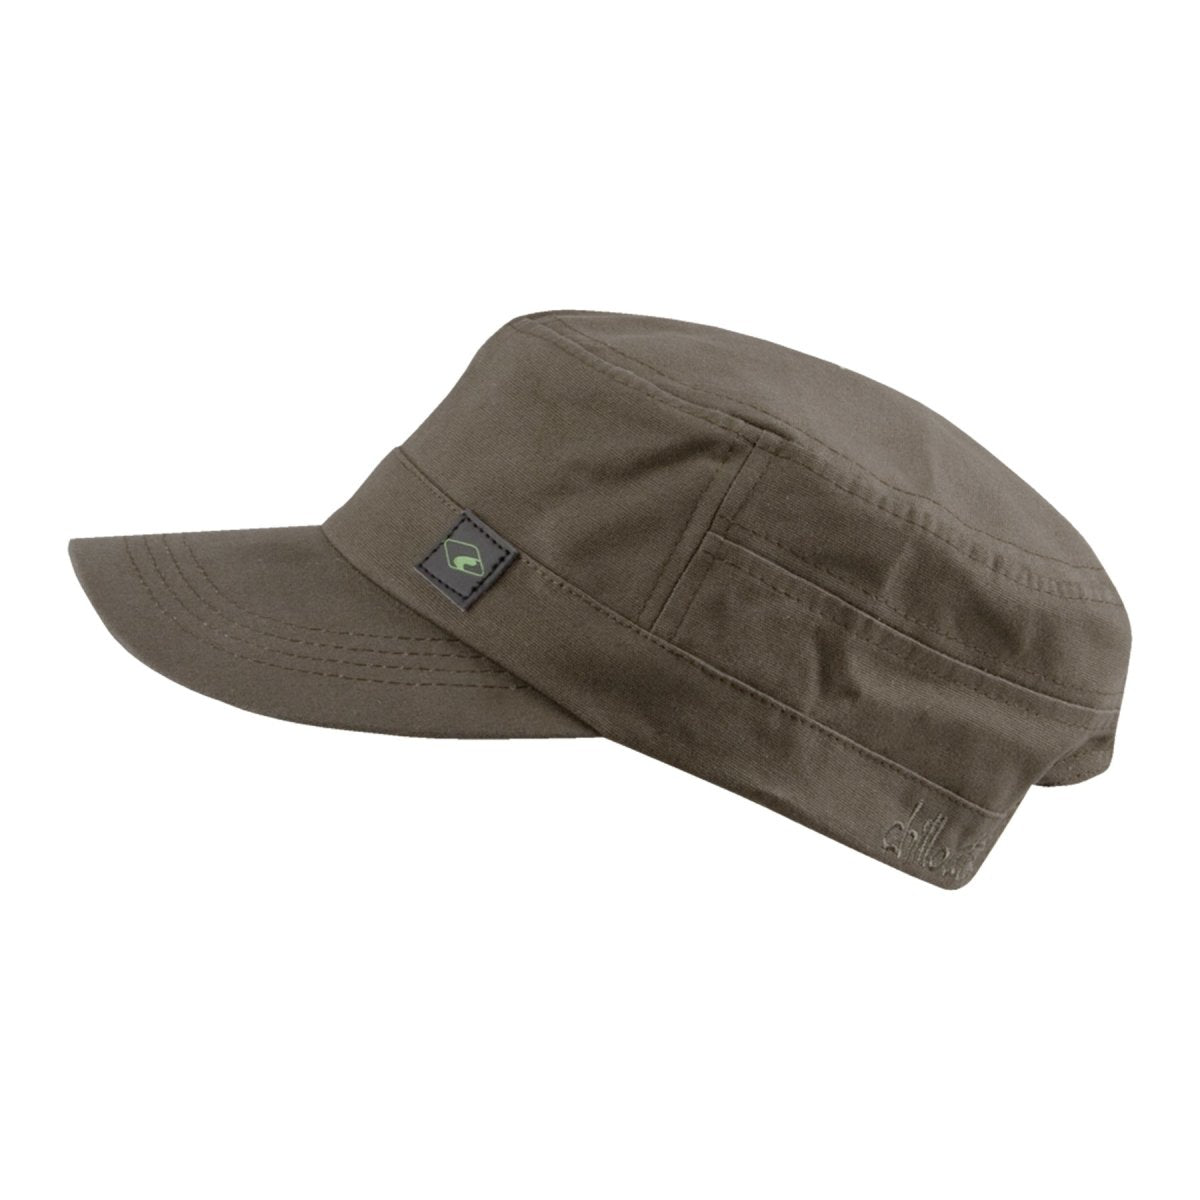 Military cap in cotton buy – - online Headwear natural made colors now! Chillouts of